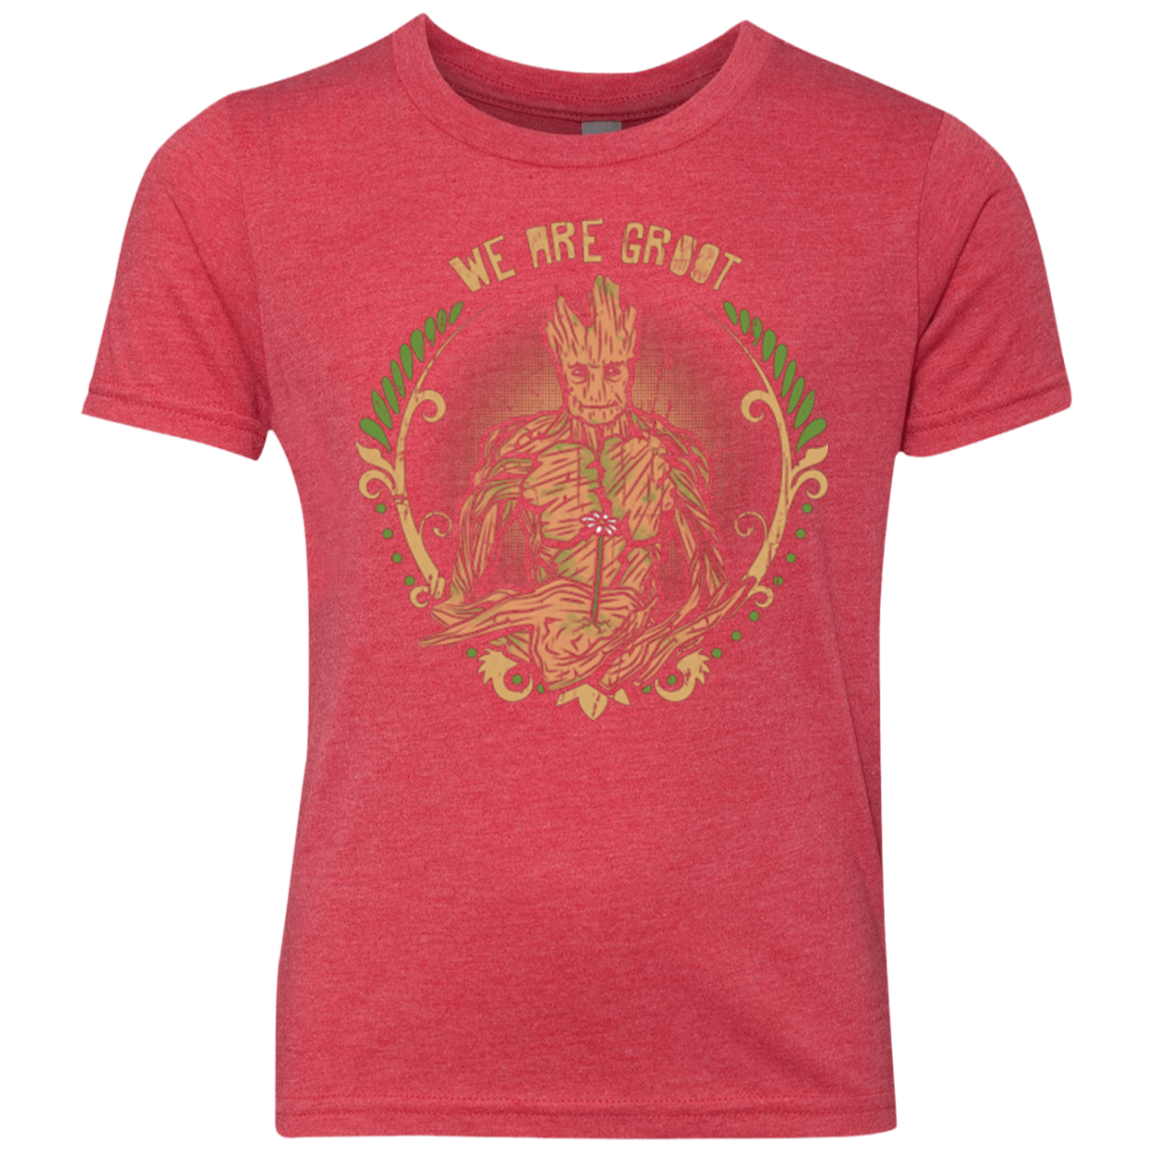 We are Groot Youth Triblend T-Shirt